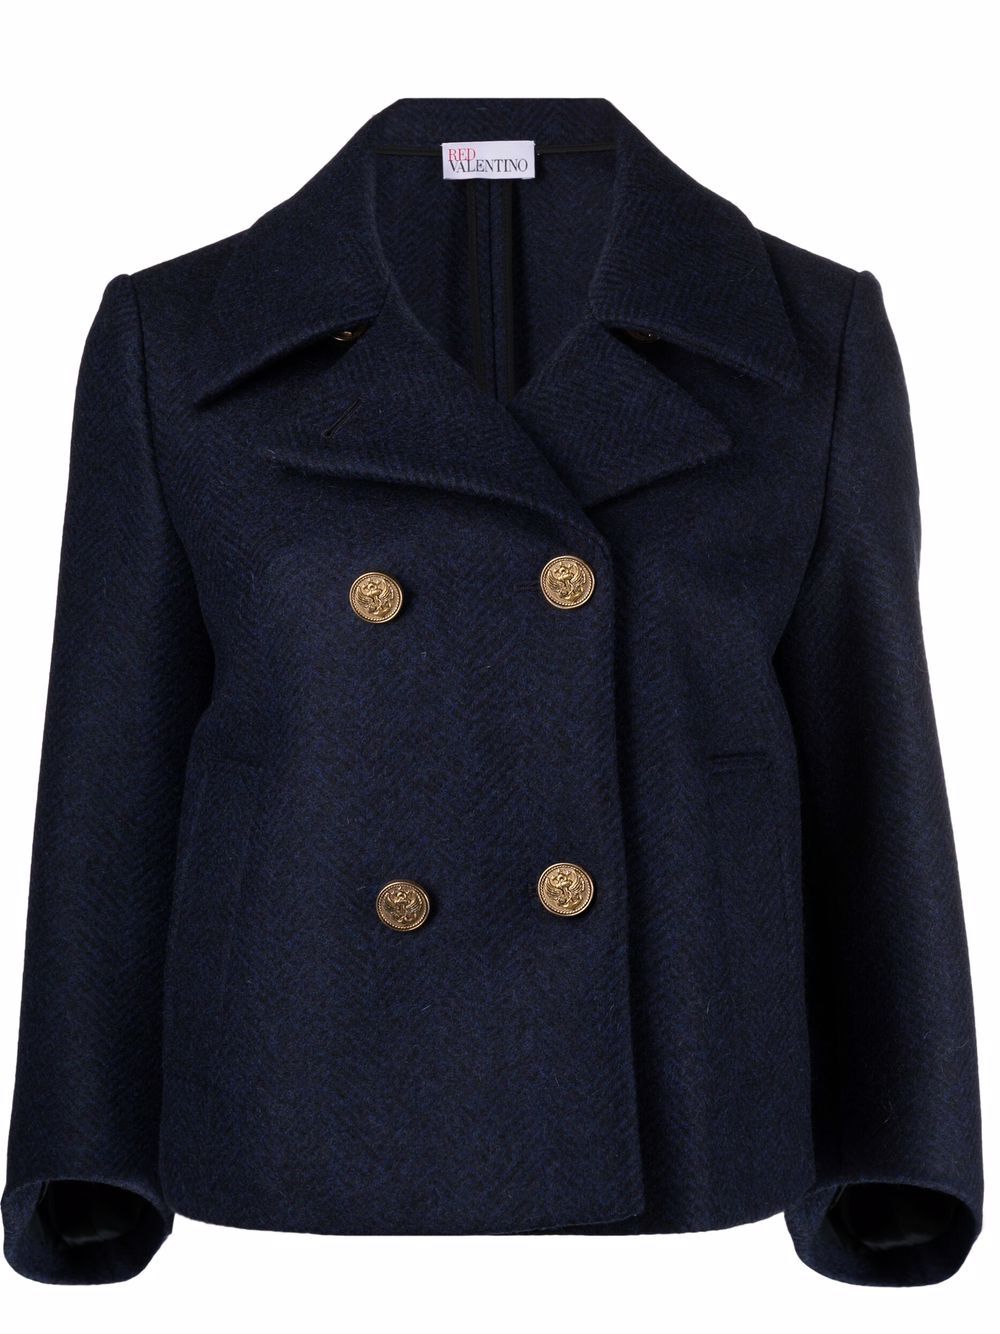 RED VALENTINO CROPPED WOOL PEACOAT